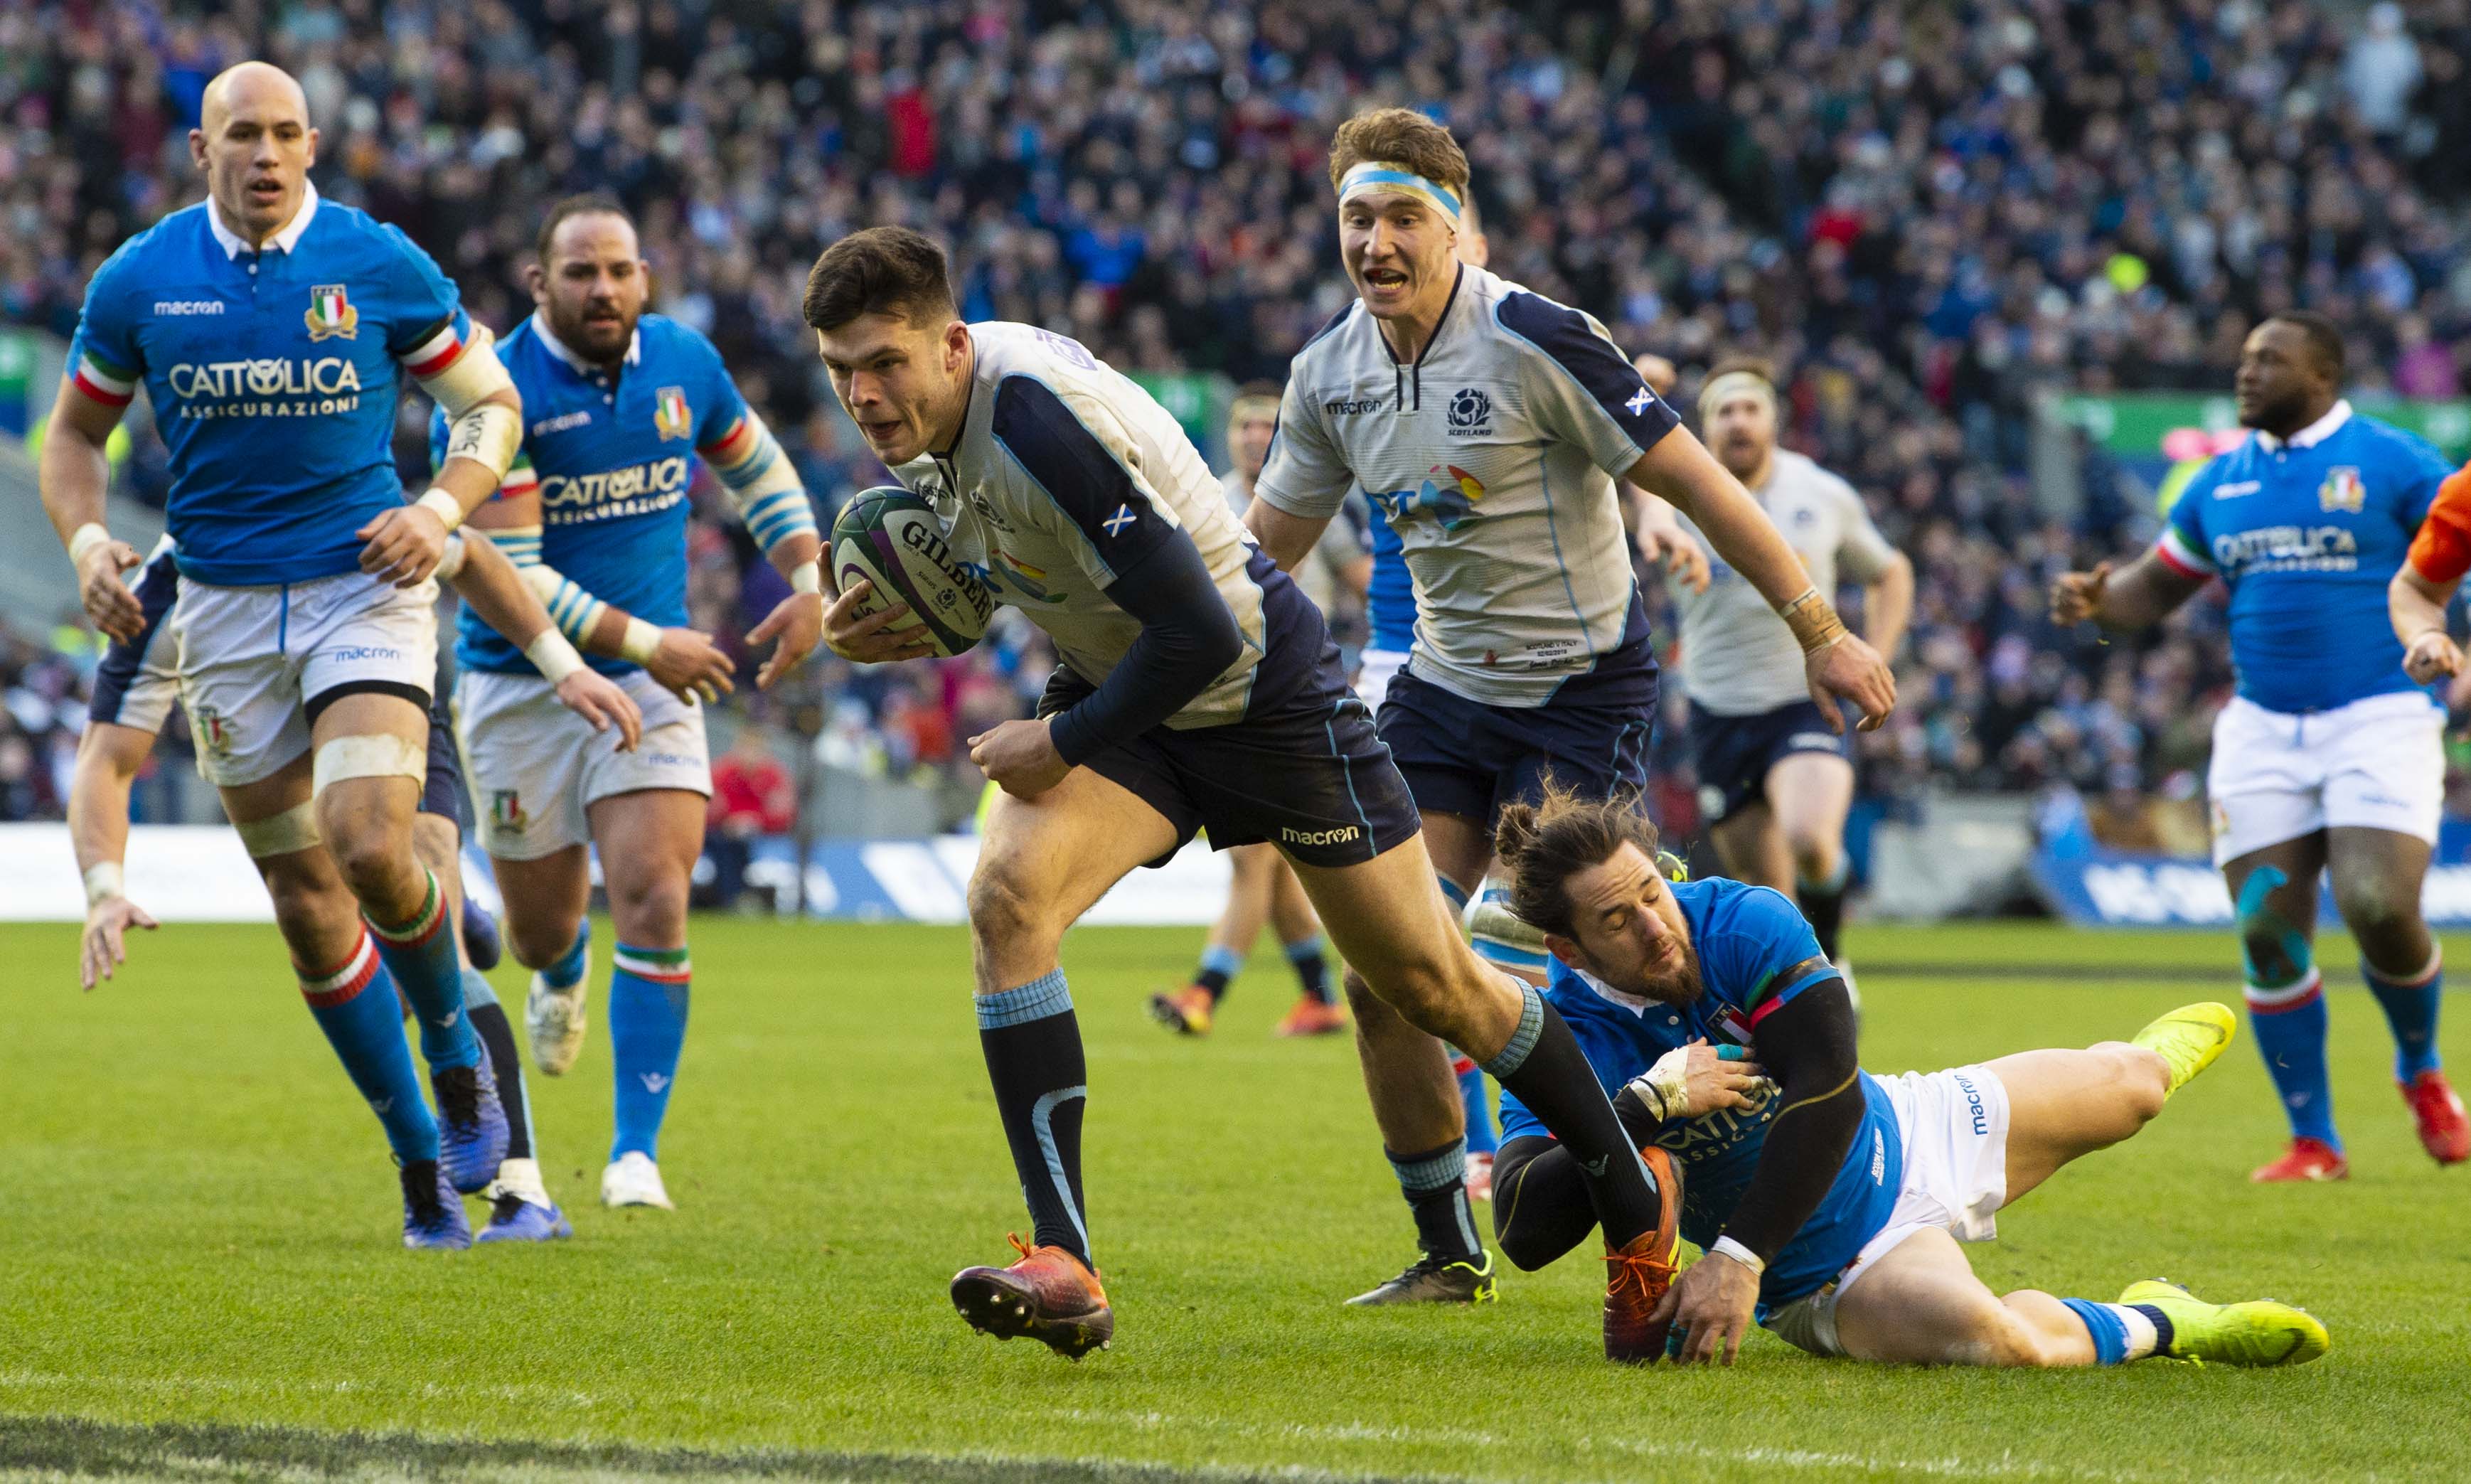 Blair Kinghorn scores against Italy last year. Scotland have beaten the Italians seven times in a row.